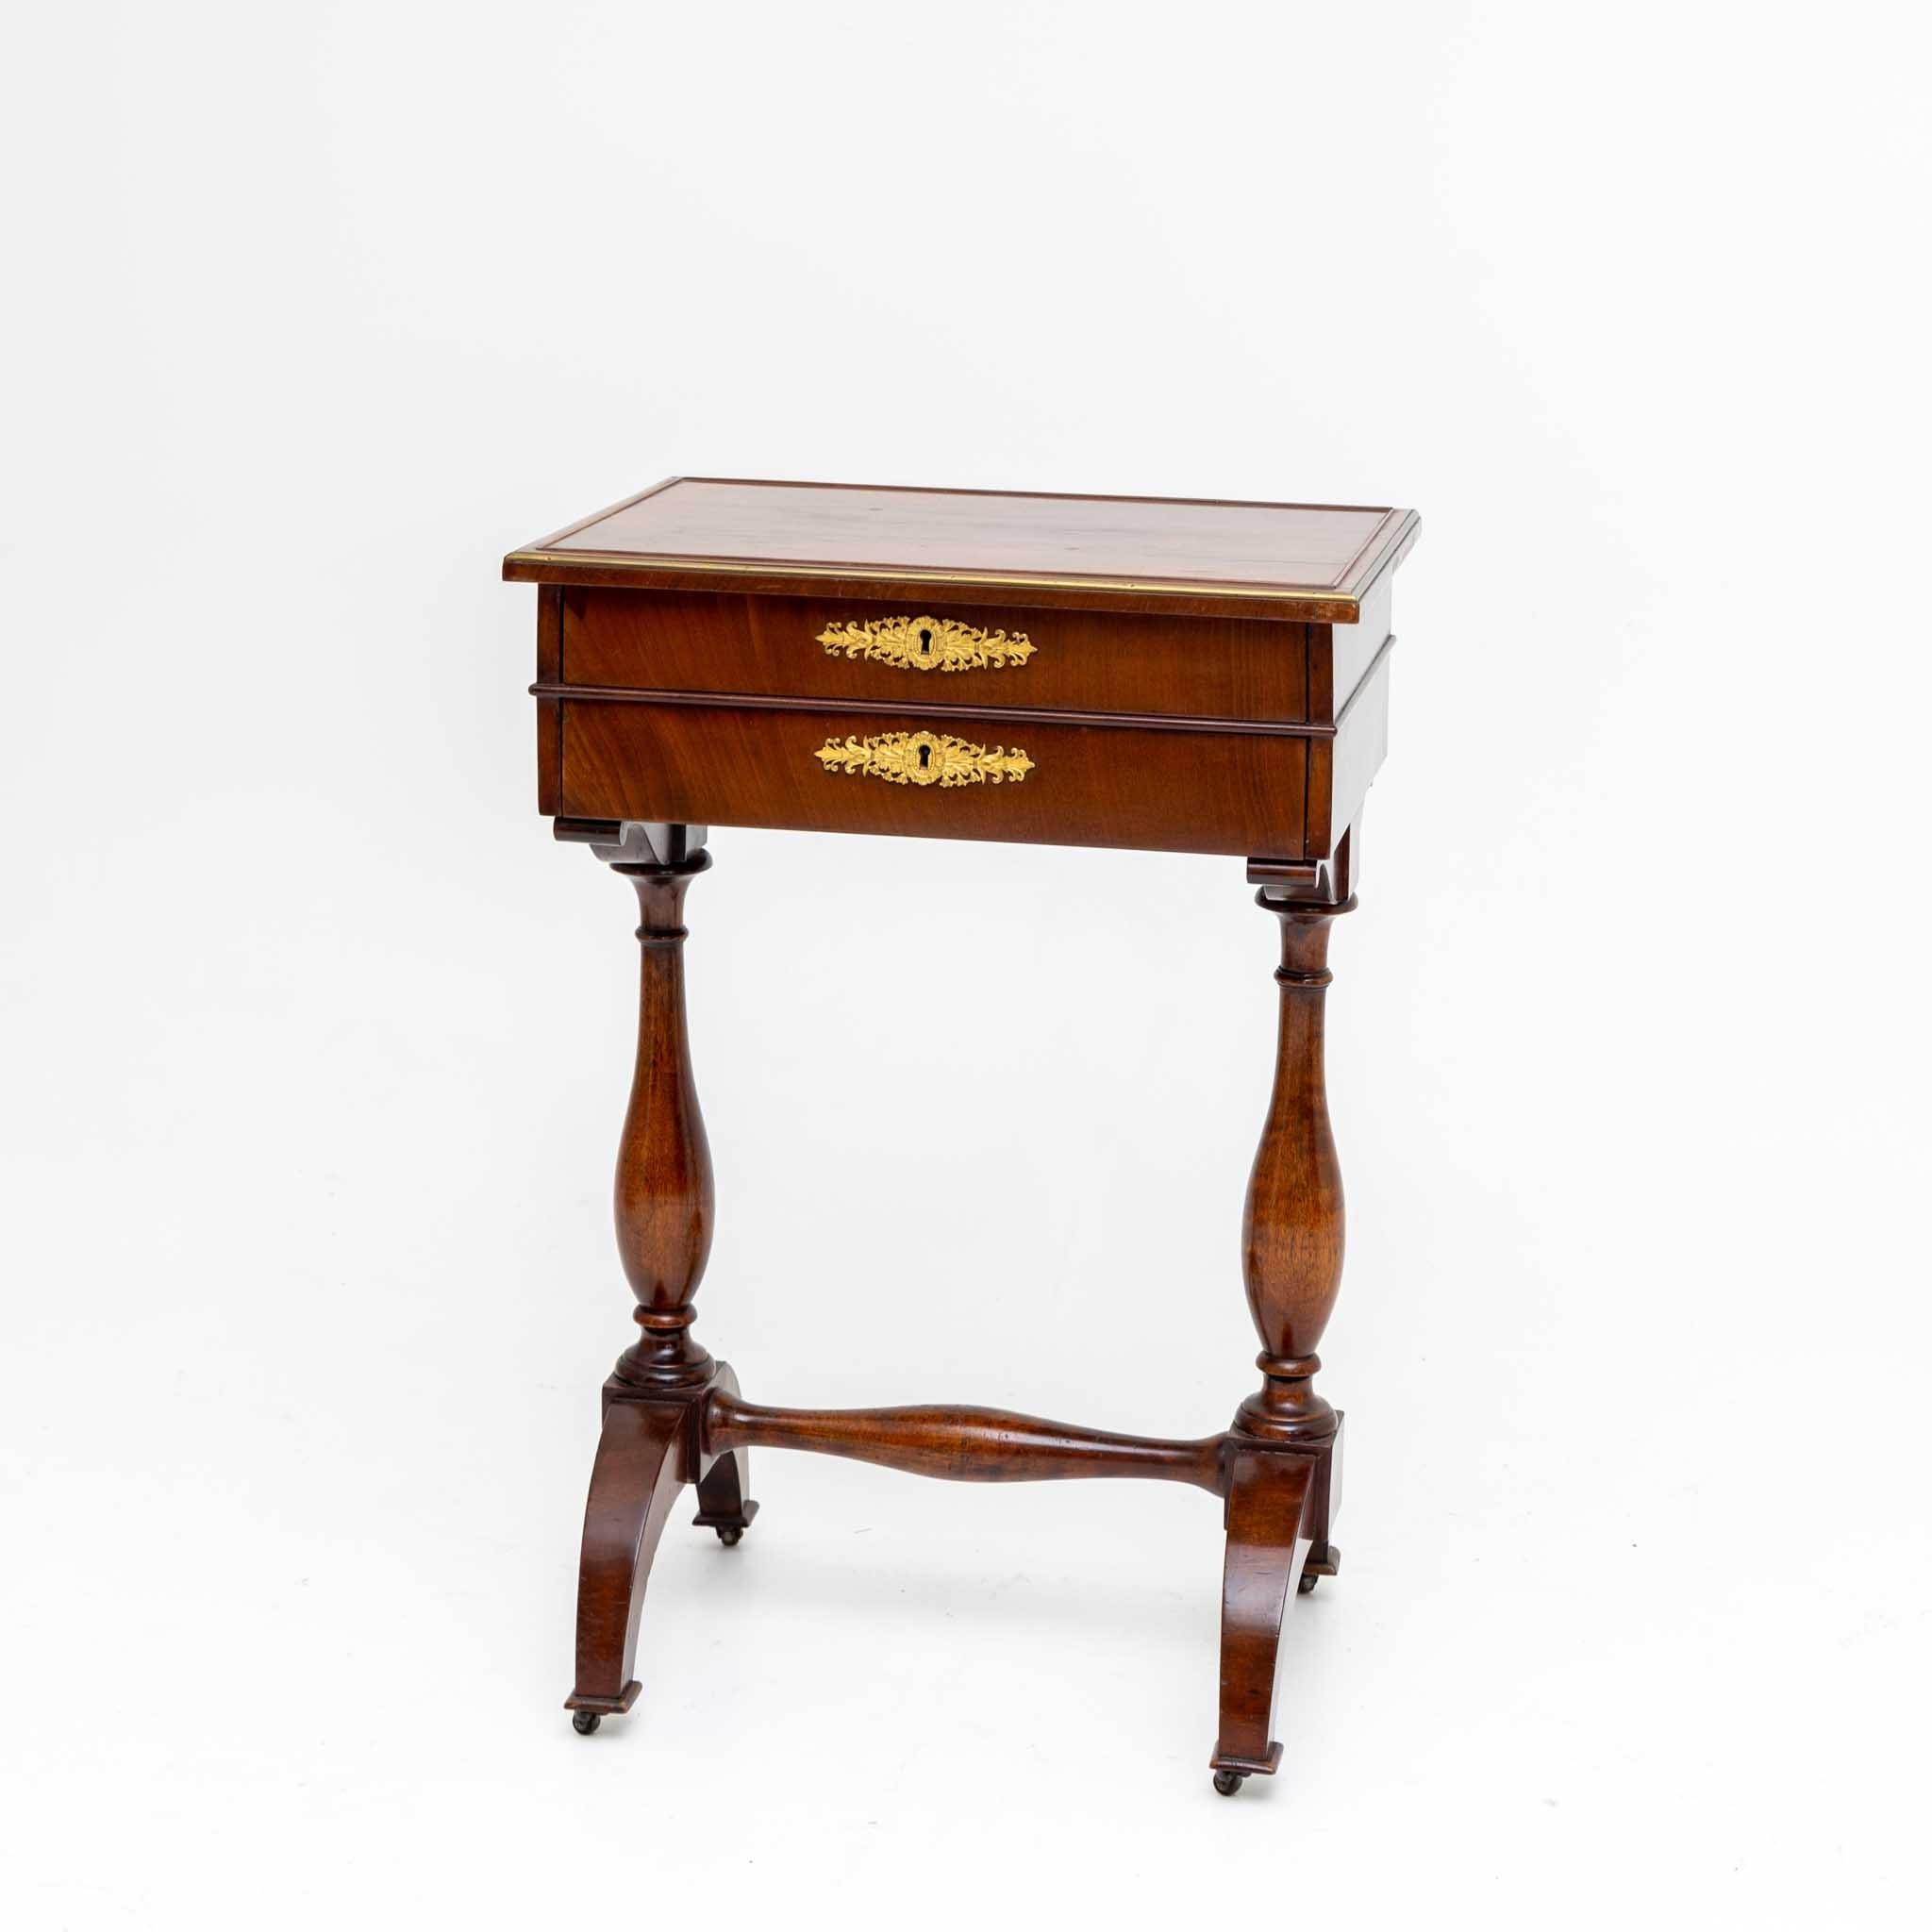 Unknown Sewing Table, Jegenstorf Castle, early 19th Century